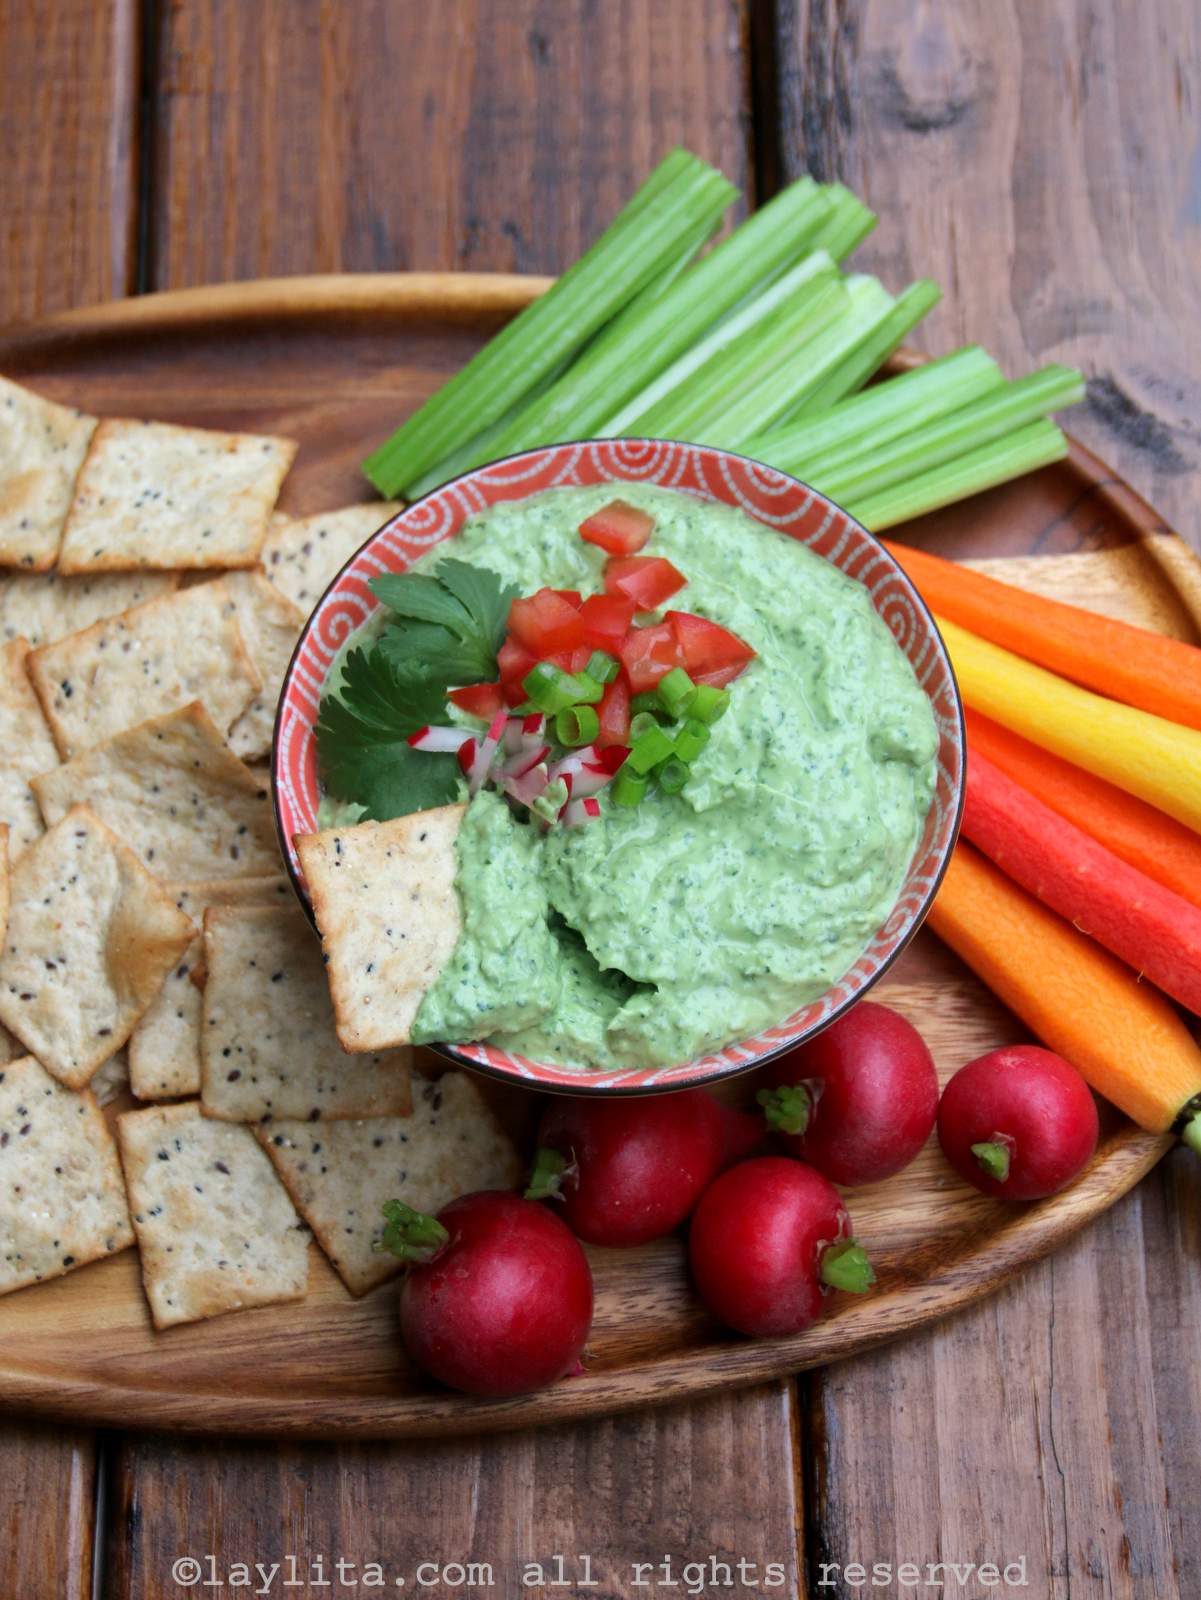 Spicy and tangy avocado yogurt dip recipe - served with carrots, radishes, celery sticks and crackers